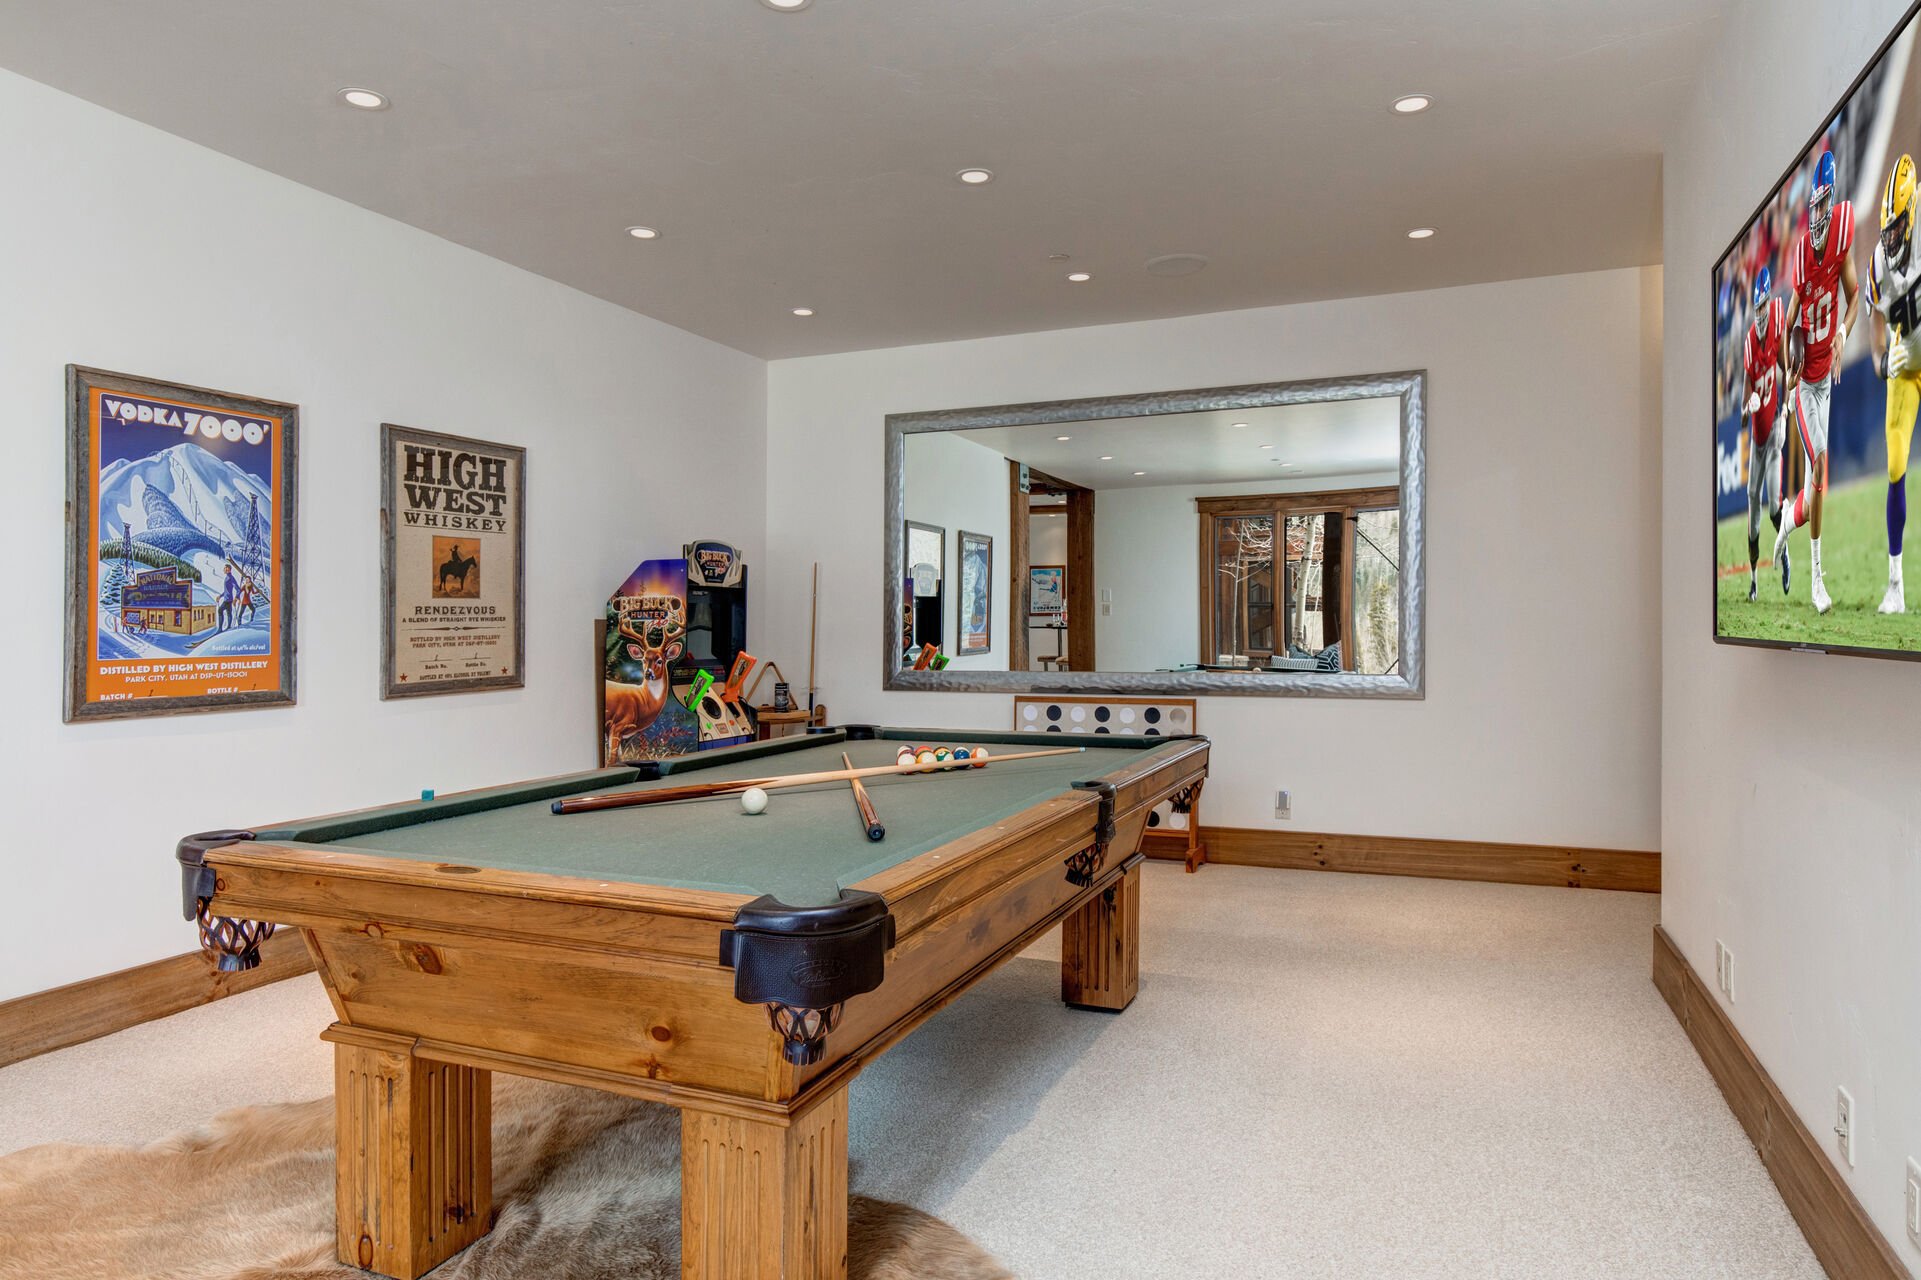 Garage level billiard area and access to Jack and Jill bathroom